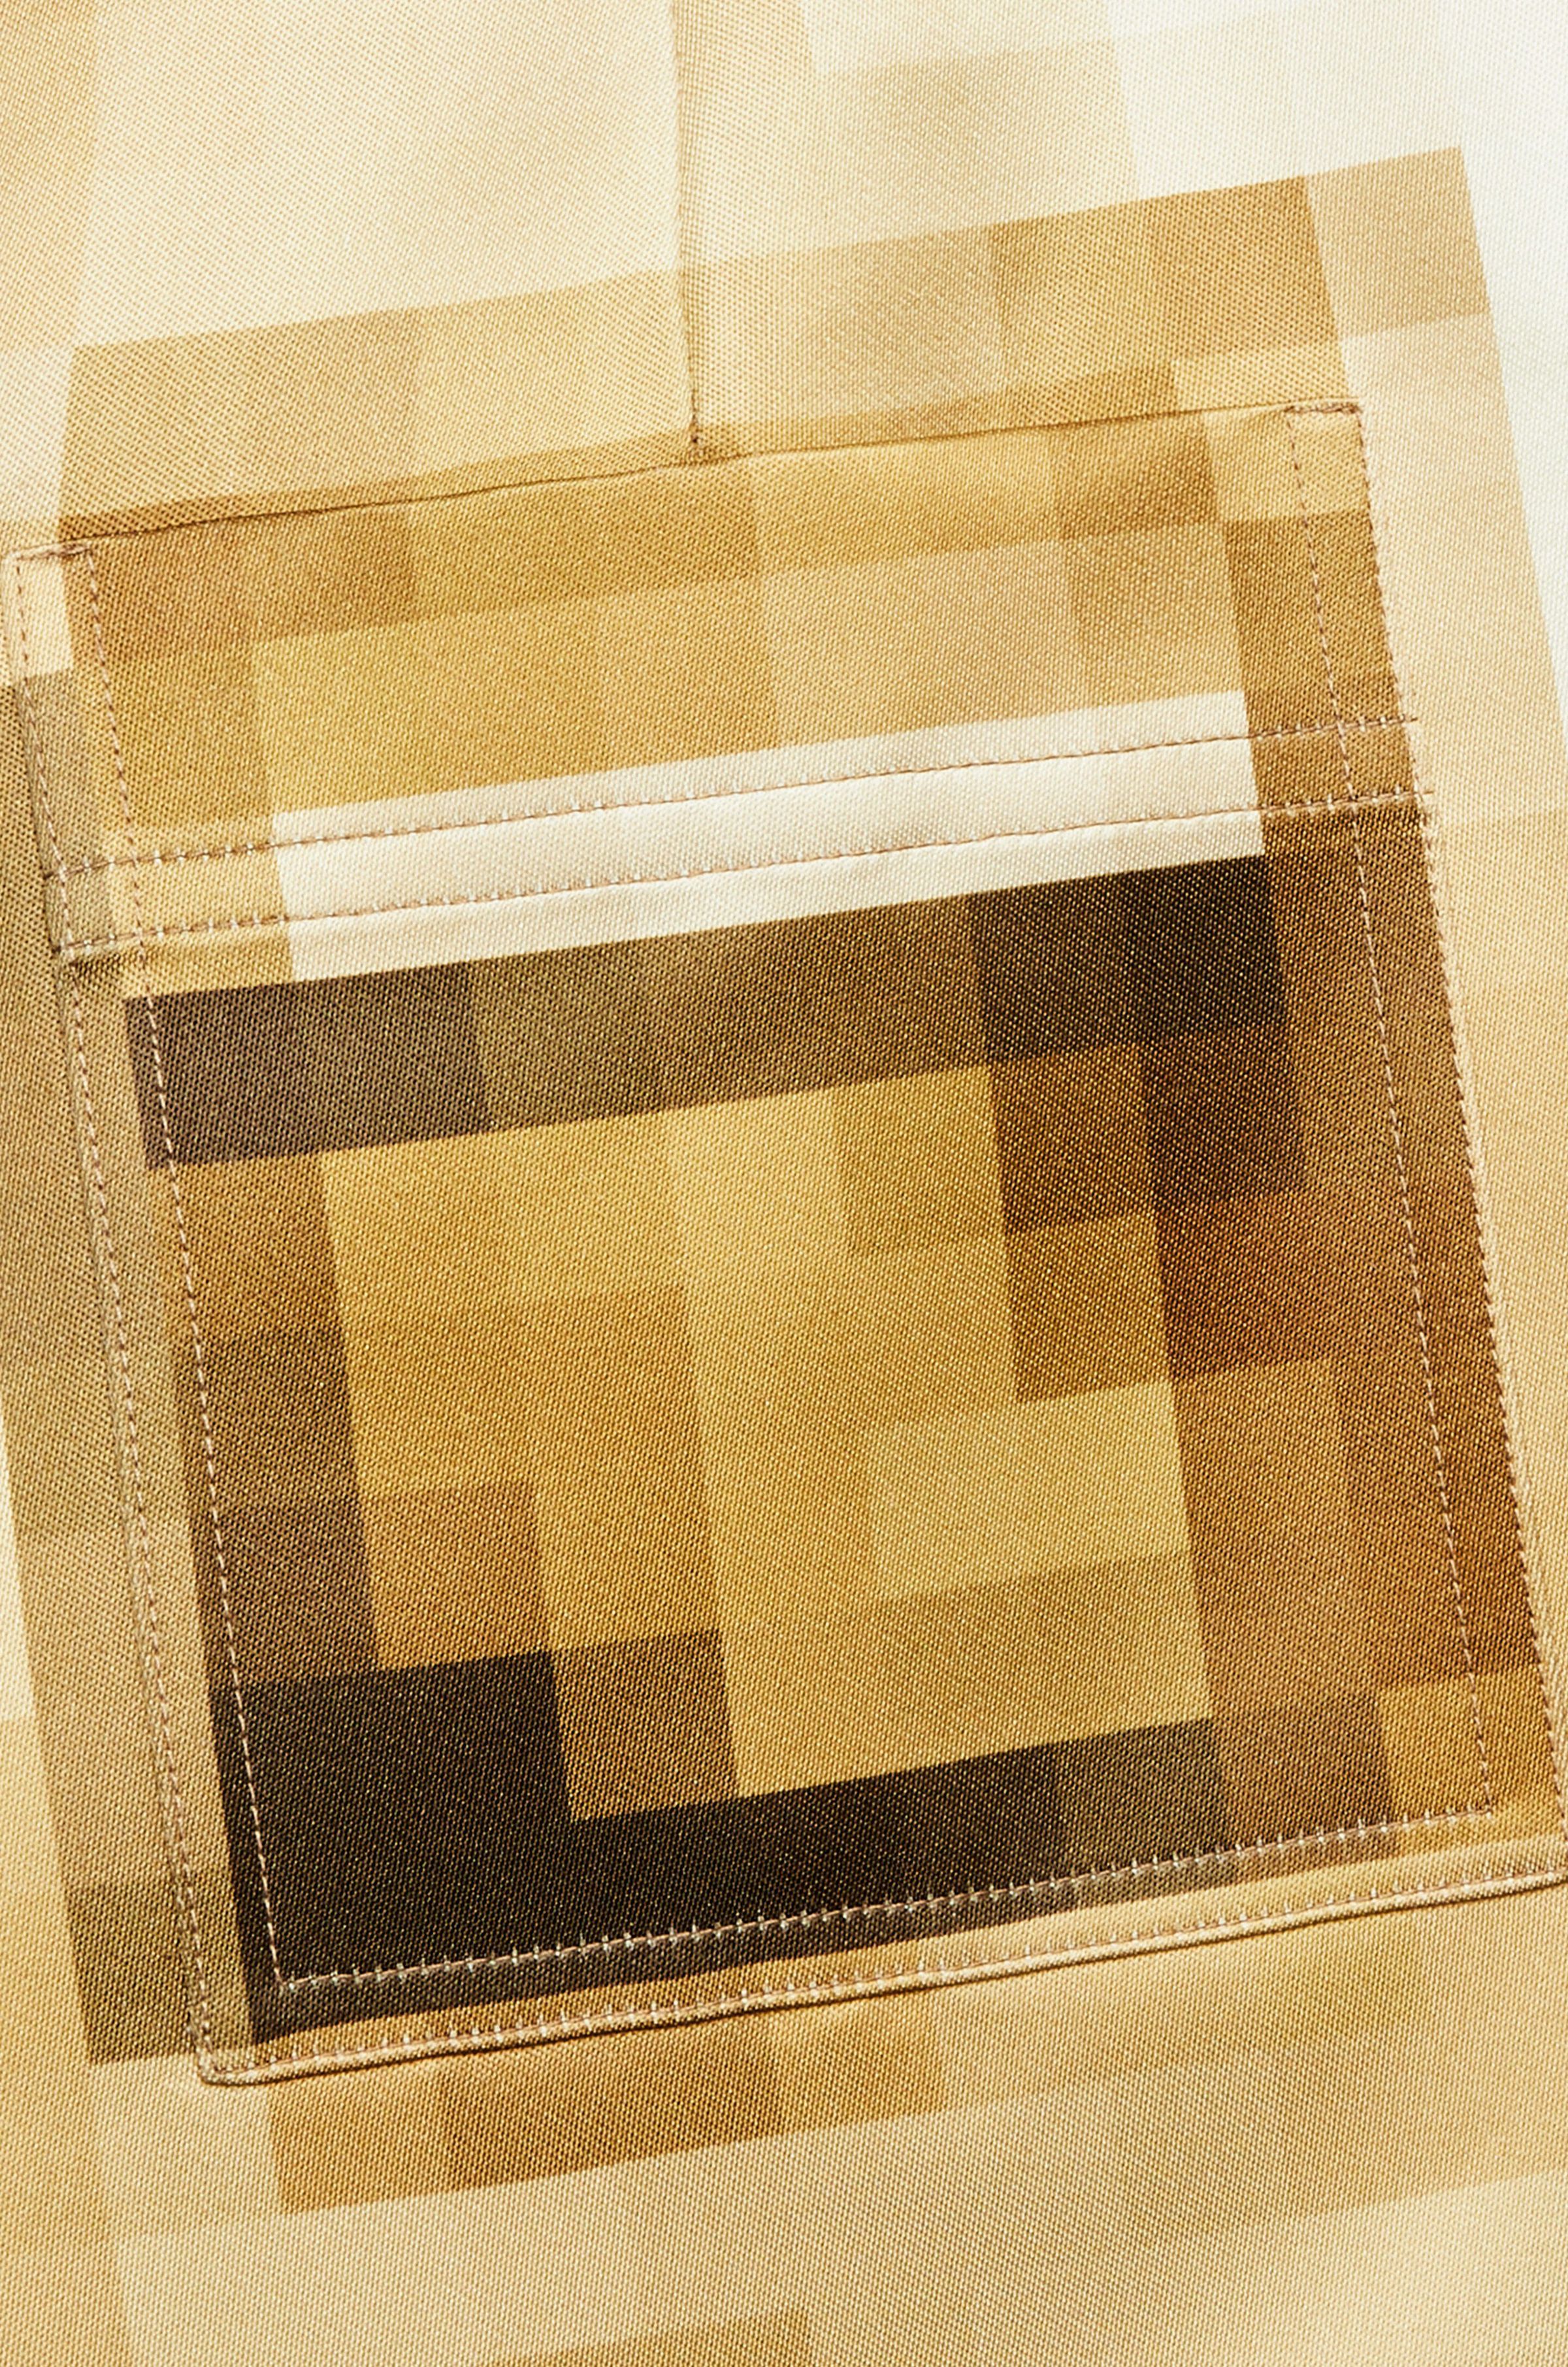 A close up image of a pair of tan trousers, designed to look pixelated from a distance.